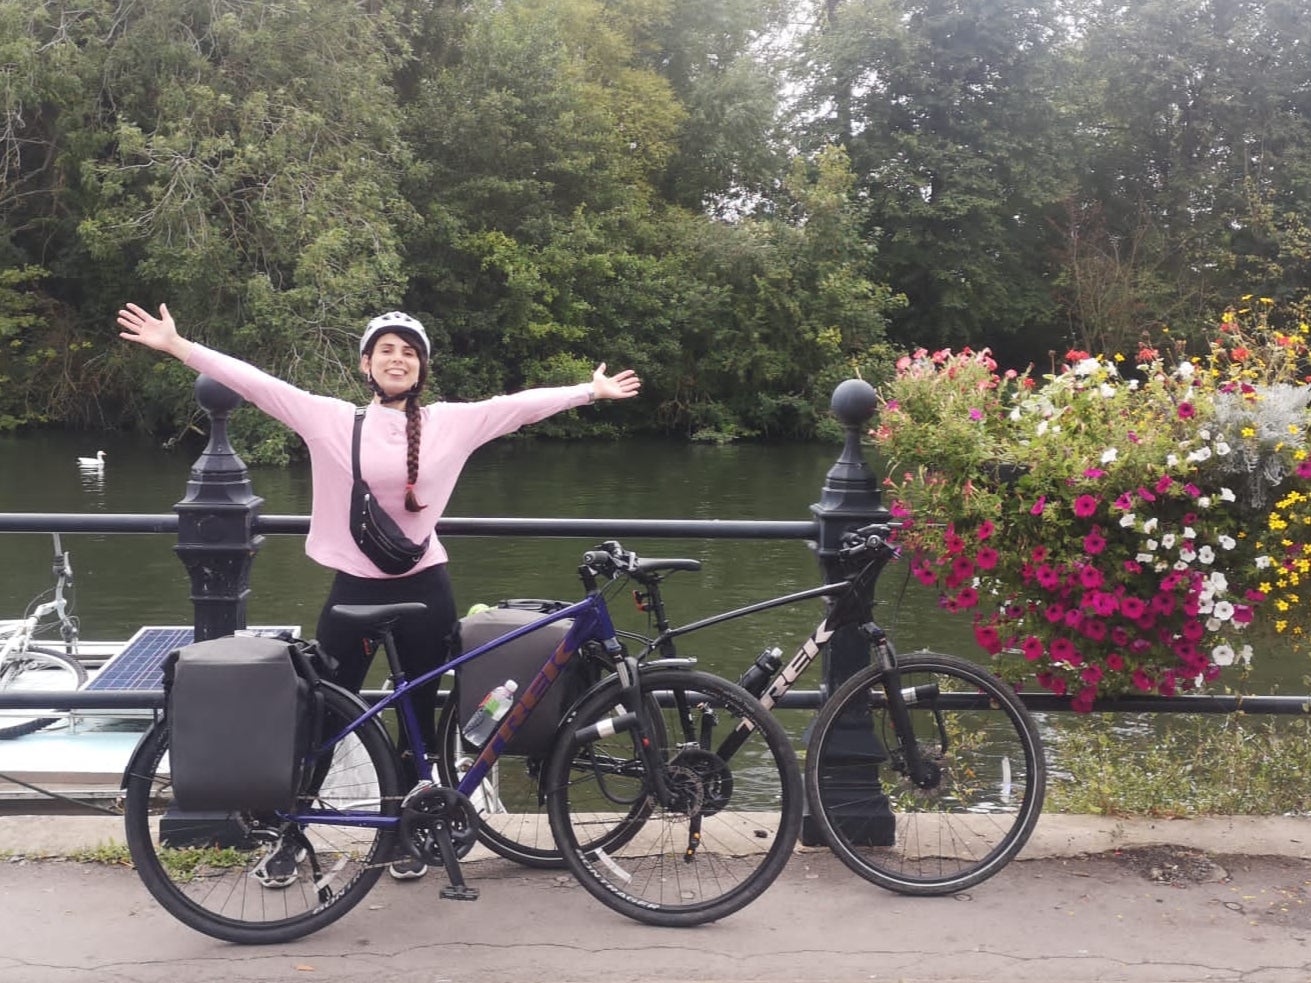 Even a cycle along the Thames can be an adventure